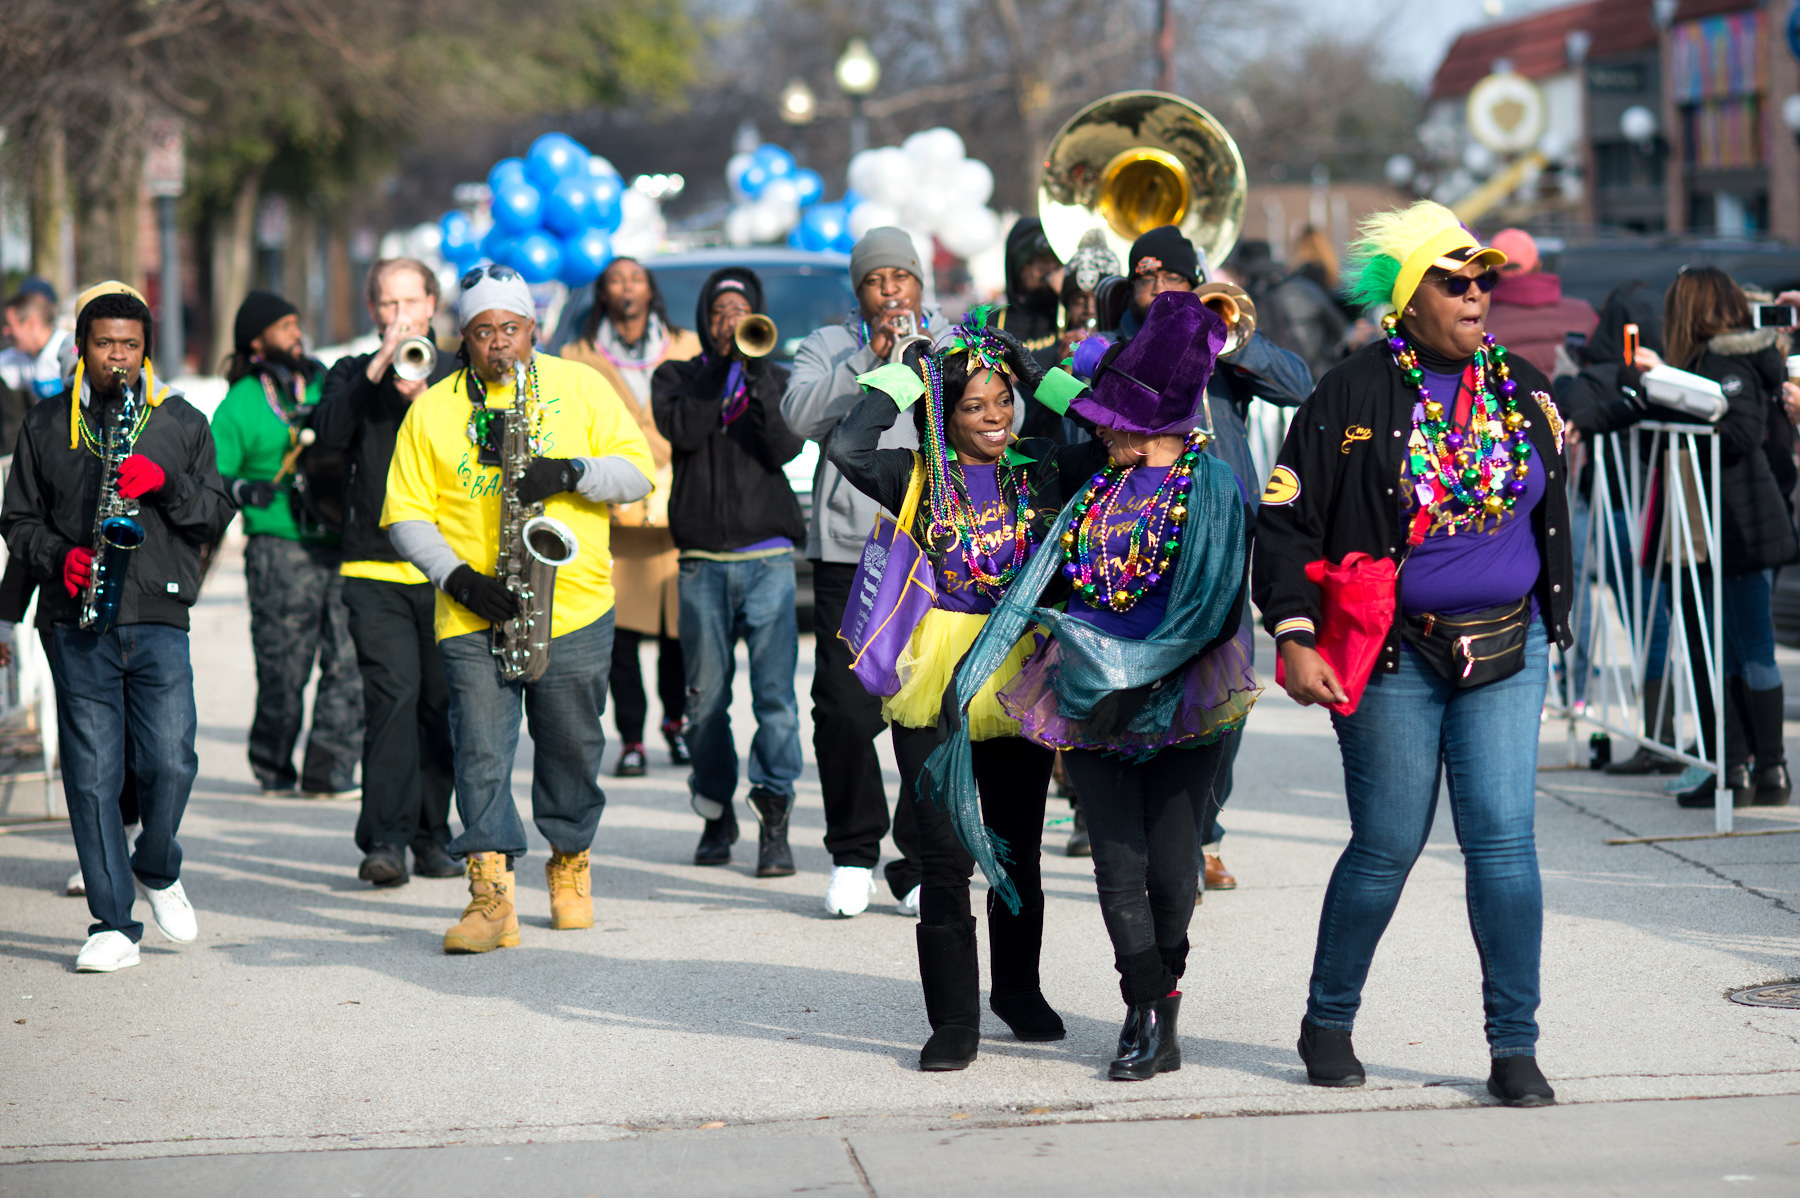 Gallery Scenes From a Chilly Mardi Gras Parade in Oak Cliff D Magazine